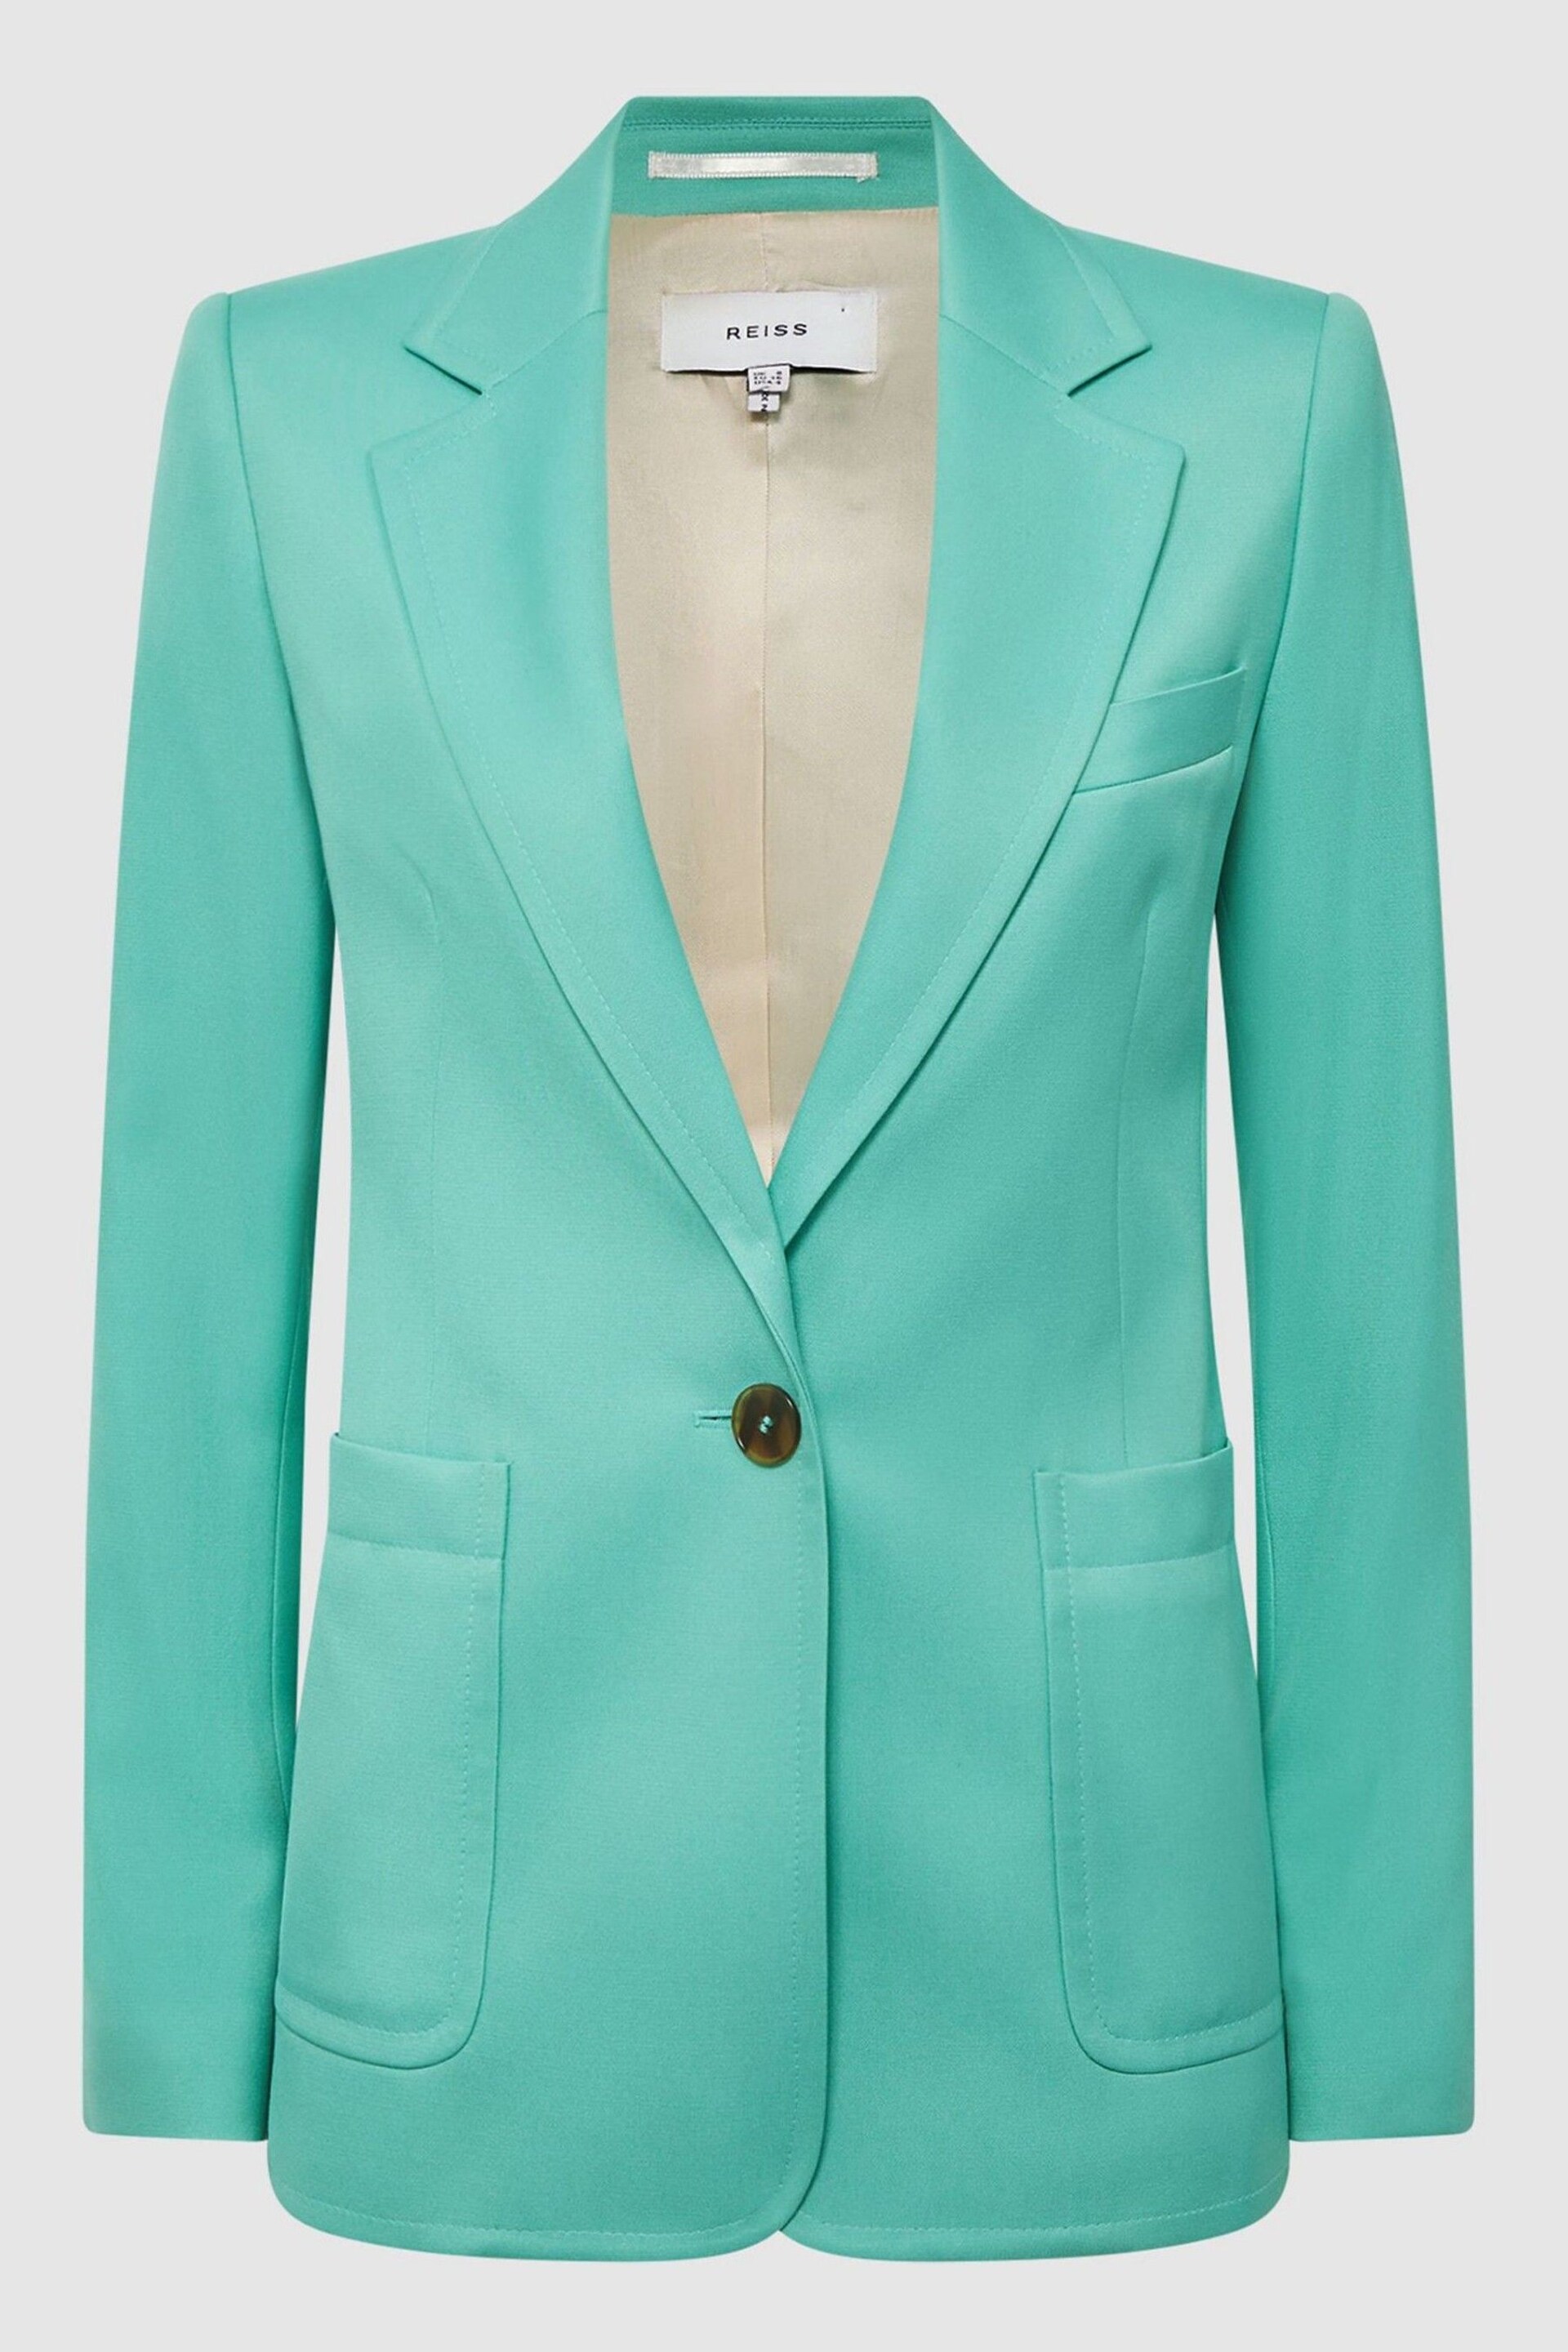 Reiss Green Ember Tailored Single Breasted Blazer - Image 2 of 6